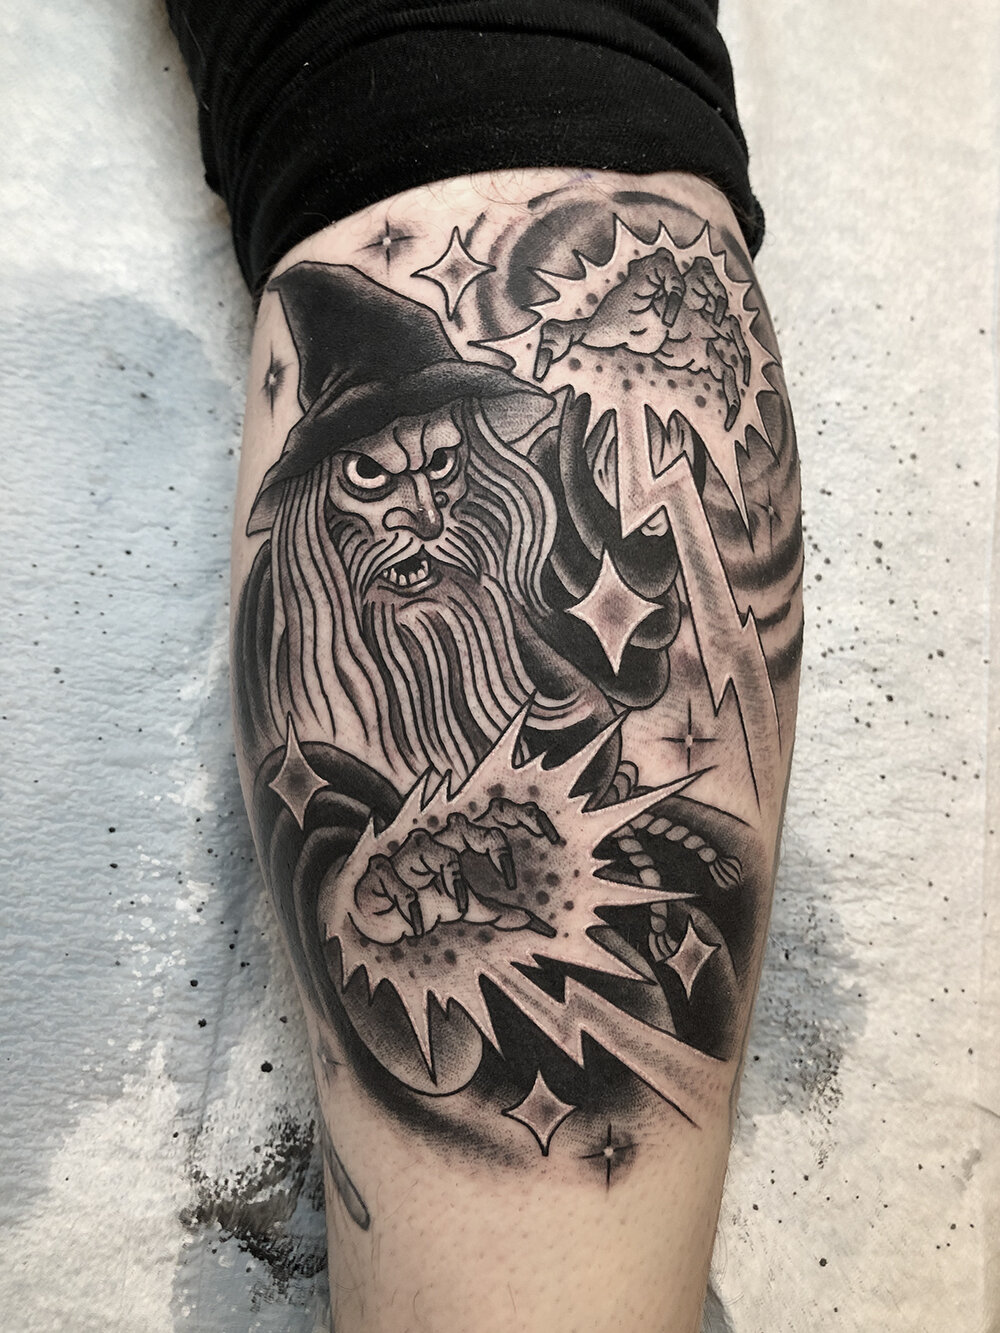 Old school wizard done by JF at Bait and Schlang in Montreal   rtraditionaltattoos